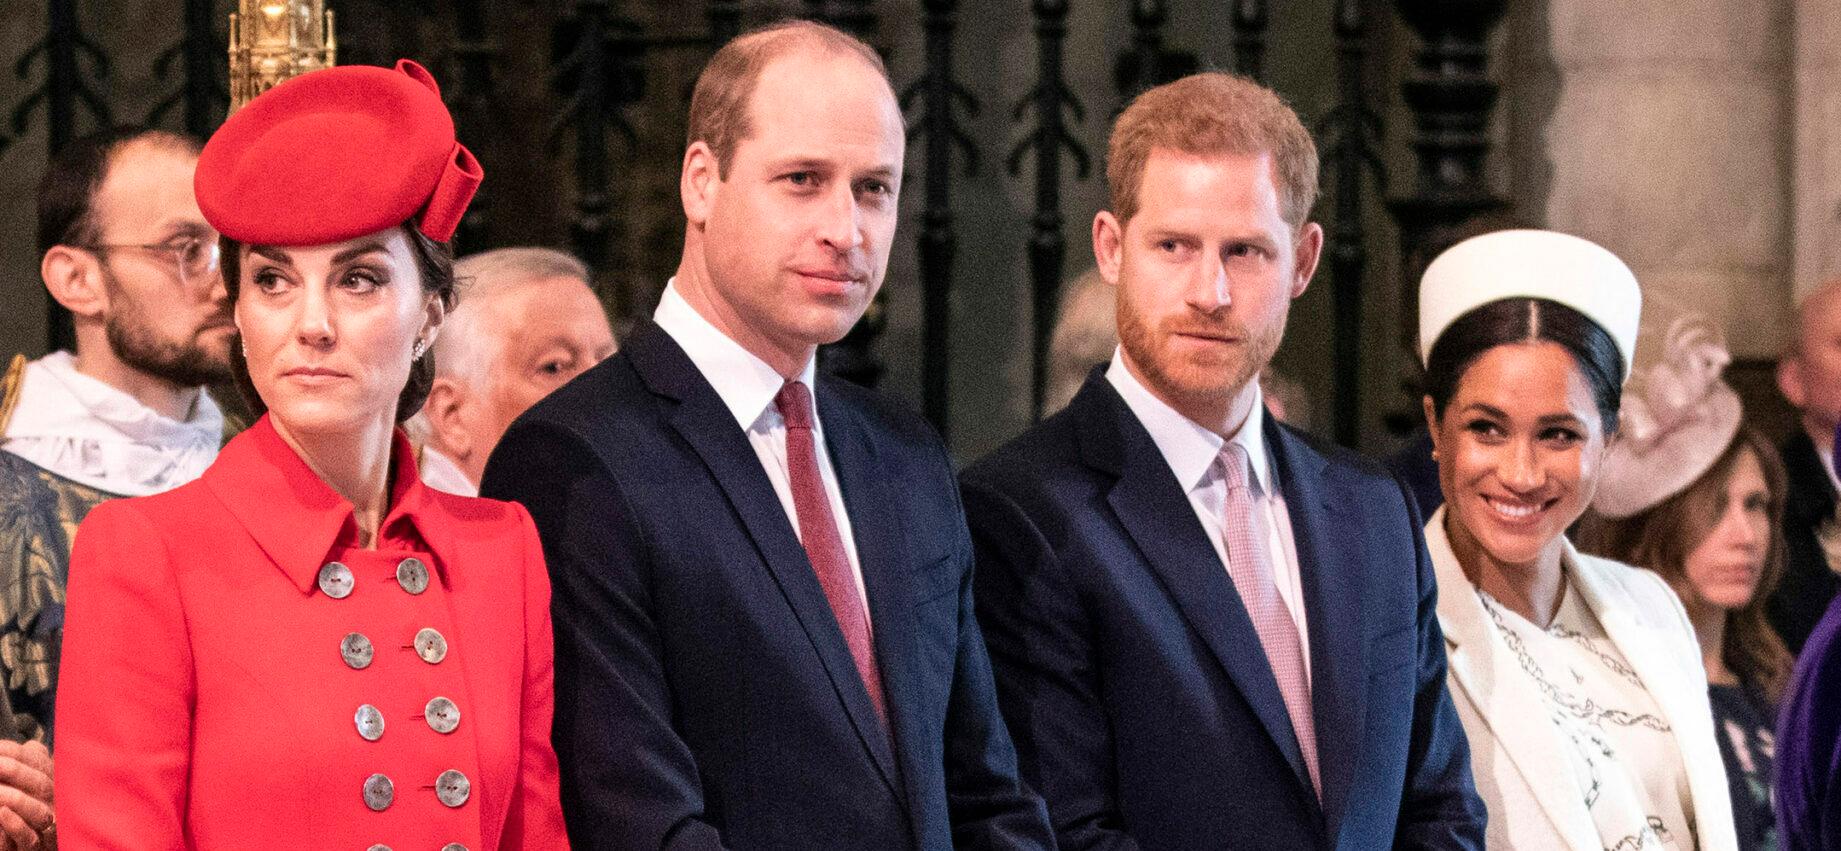 Prince William And Harry’s Relationship Reportedly ‘Done’ After Bombshell Netflix Docuseries